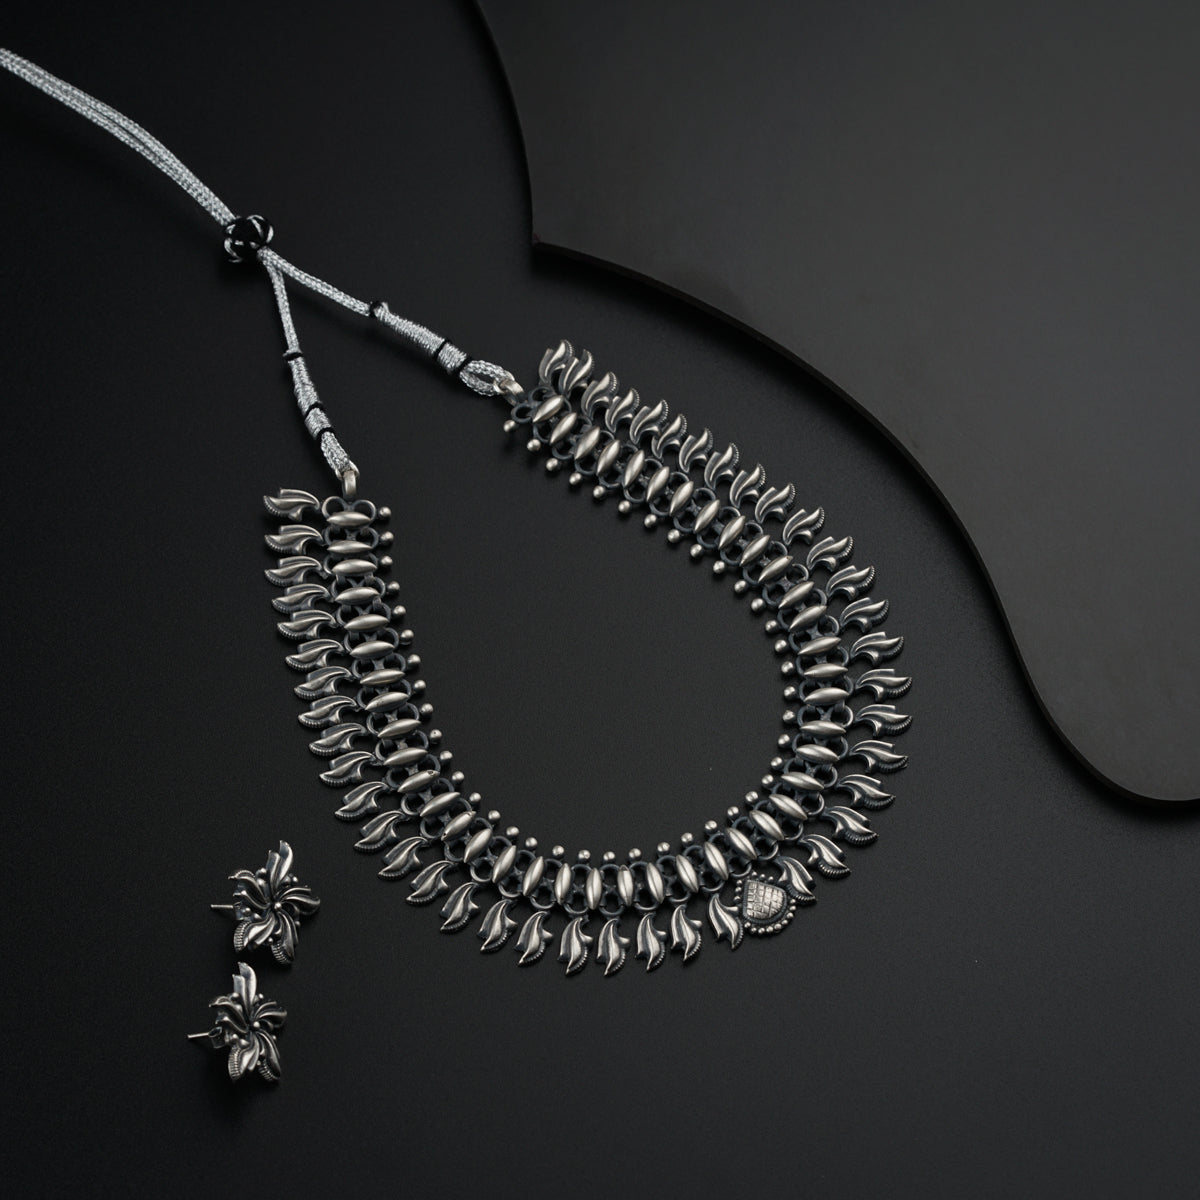 a silver necklace and earring on a black surface